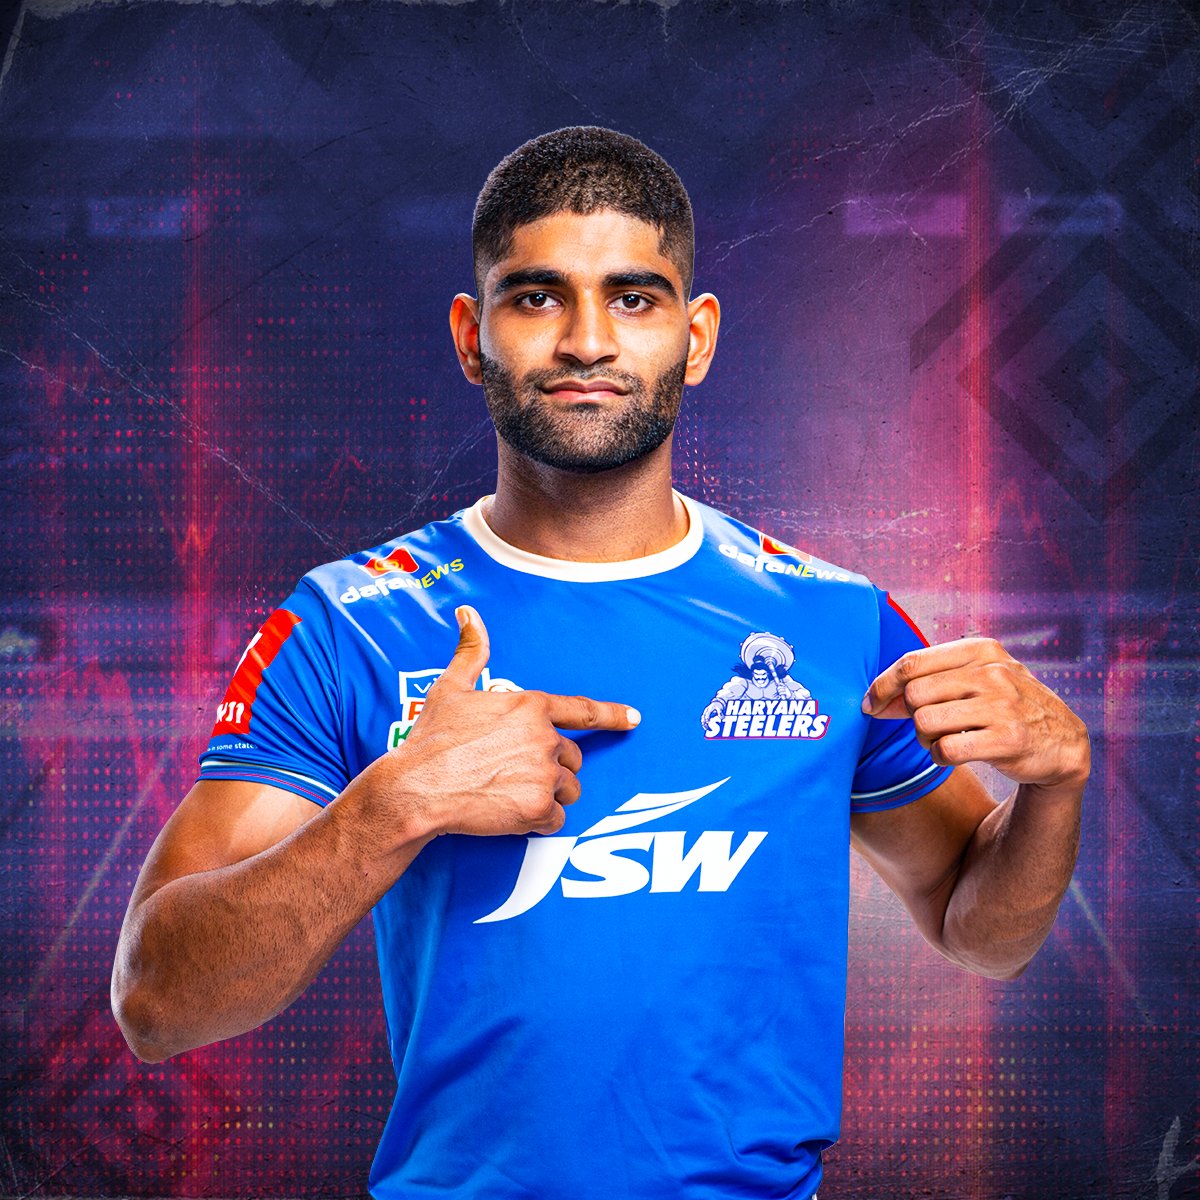 PKL 9 LIVE: All eyes on MOST expensive Pro Kabaddi League player Pawan Kumar Sehrawat as he takes center stage with Tamil Thalaivas on 'Triple Panga' Matchday 2, Patna Pirates VS Puneri Paltan LIVE, Gujarat Giants VS Tamil Thalaivas LIVE, Bengal Warriors VS Haryana Steelers LIVE